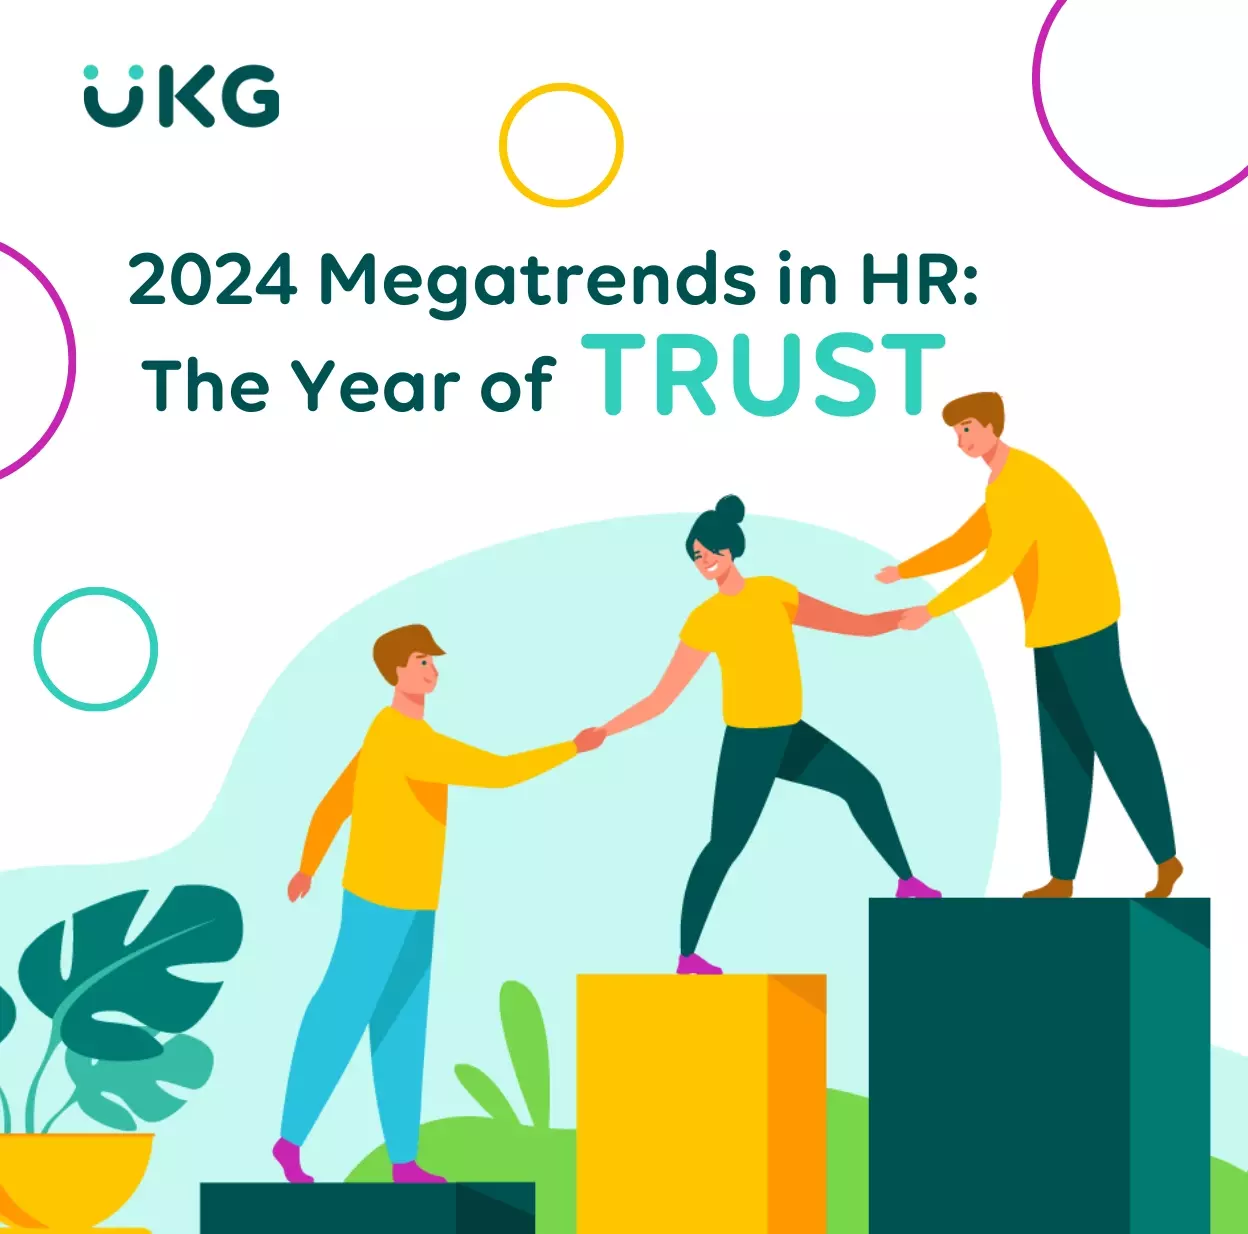 2024 Megatrends in HR: The Year of Trust